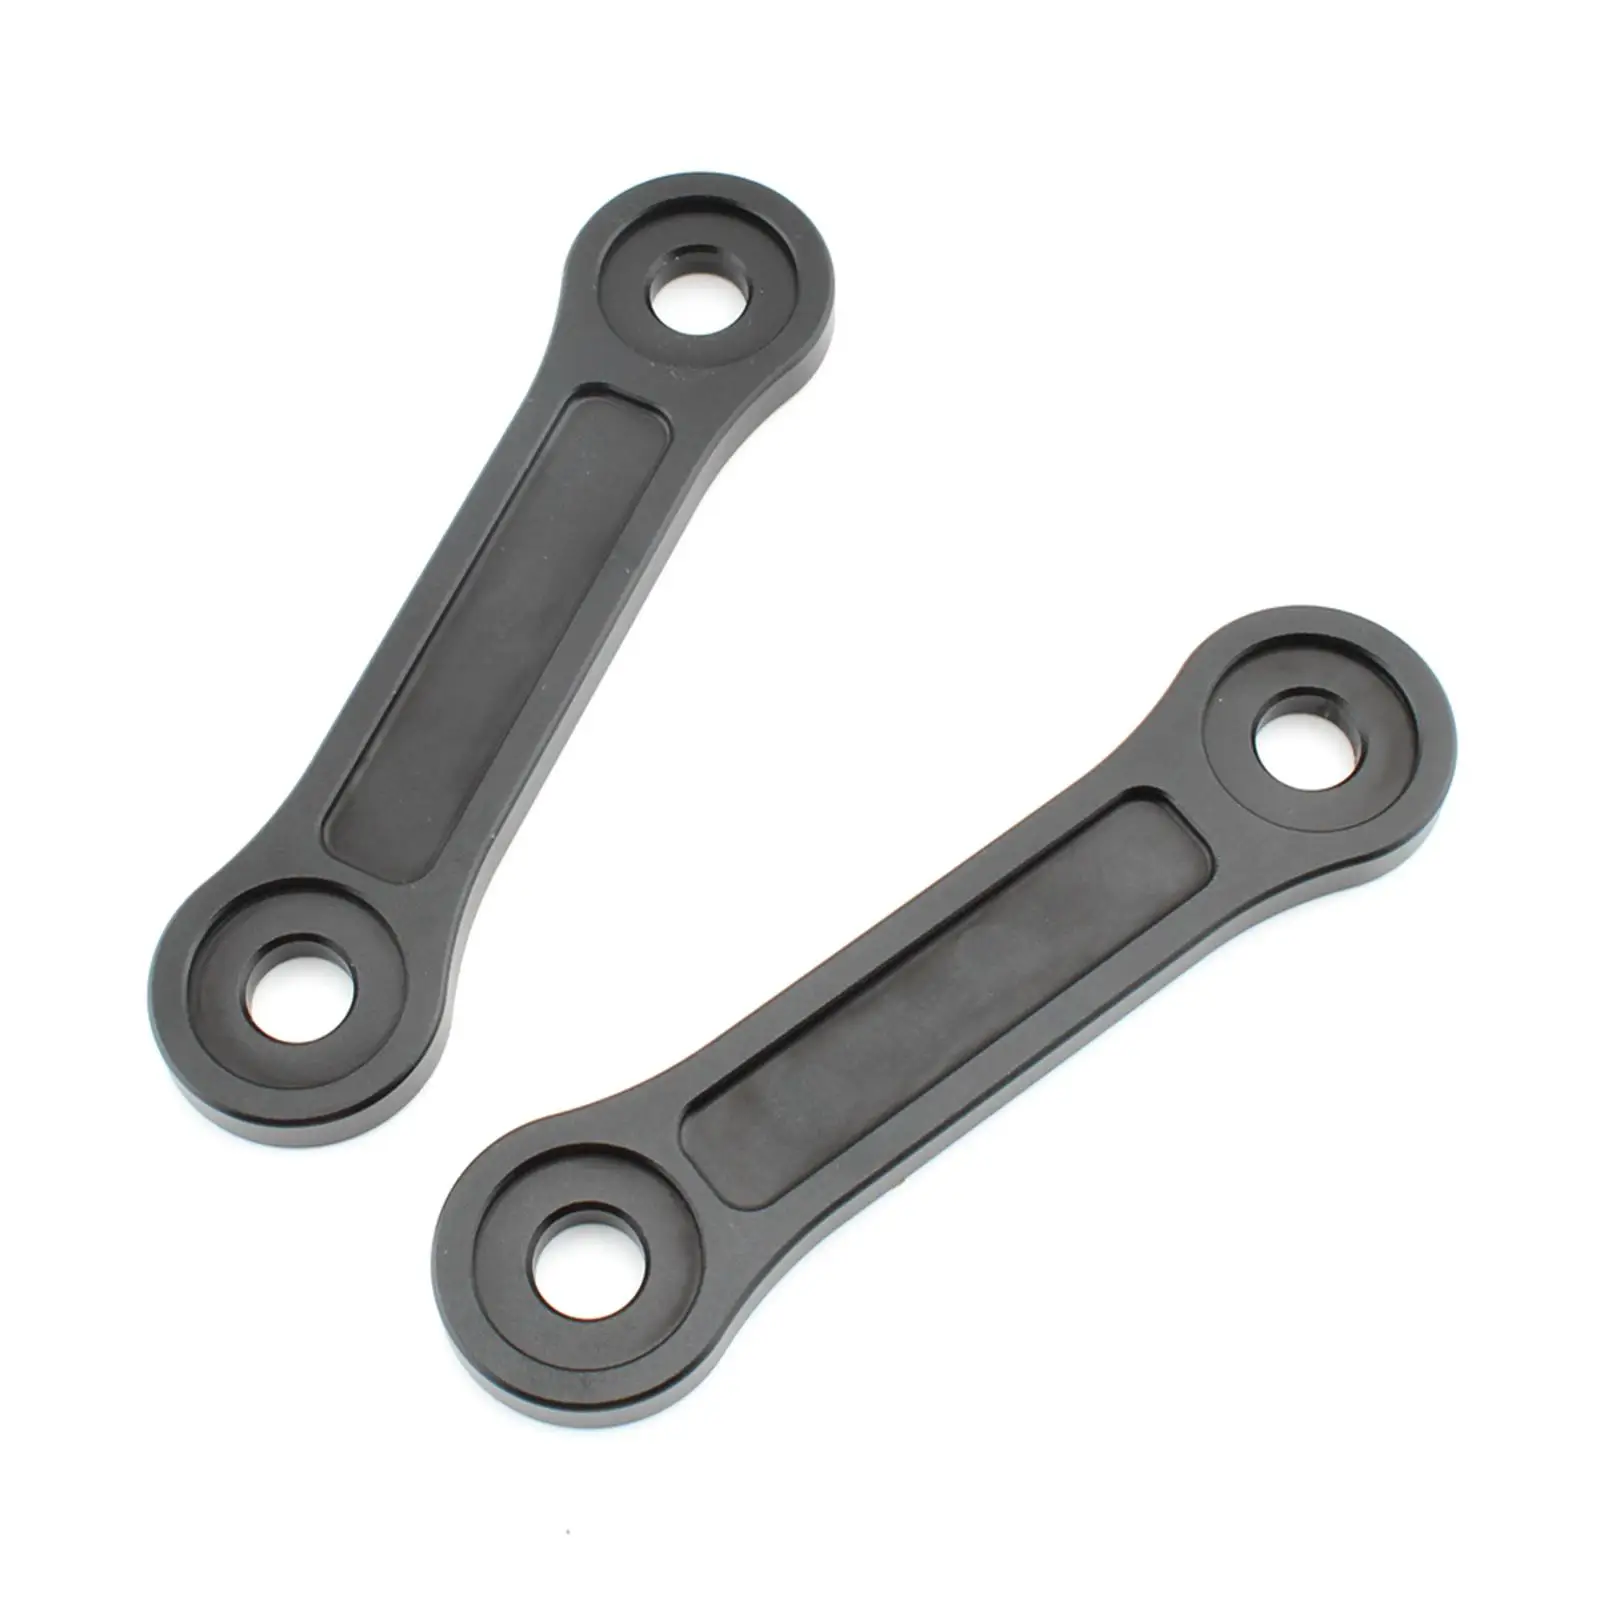 2 Pieces Motorcycle Suspension Lowering Links Kit 20mm for Tiger 1200